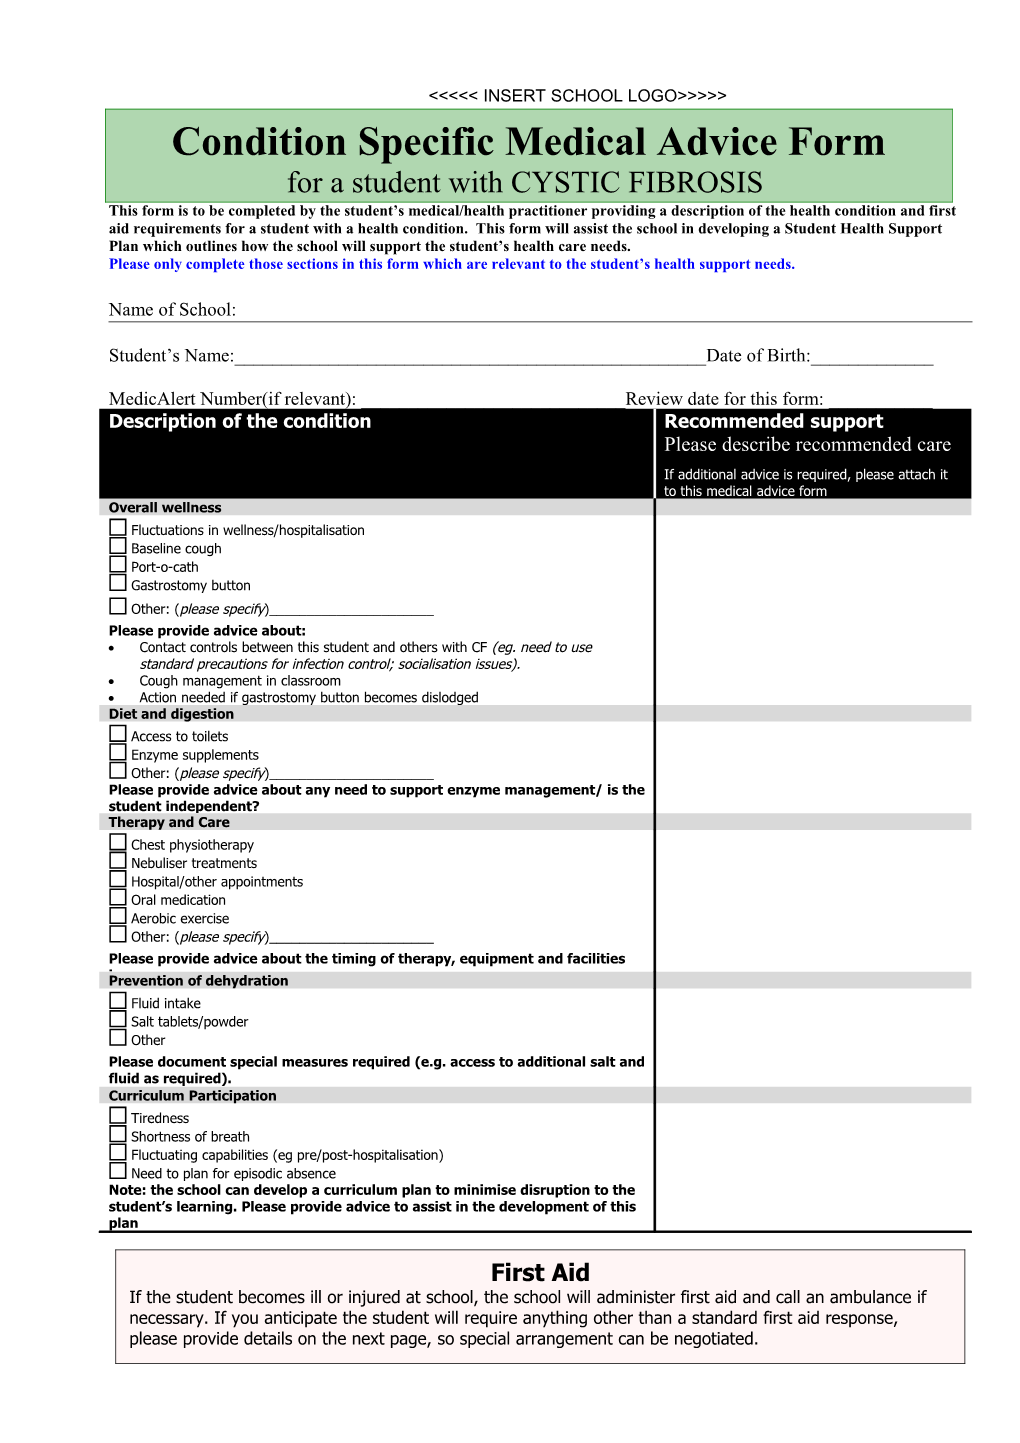 Condition Specific Mecal Advice Form: Cystic Fibrosis